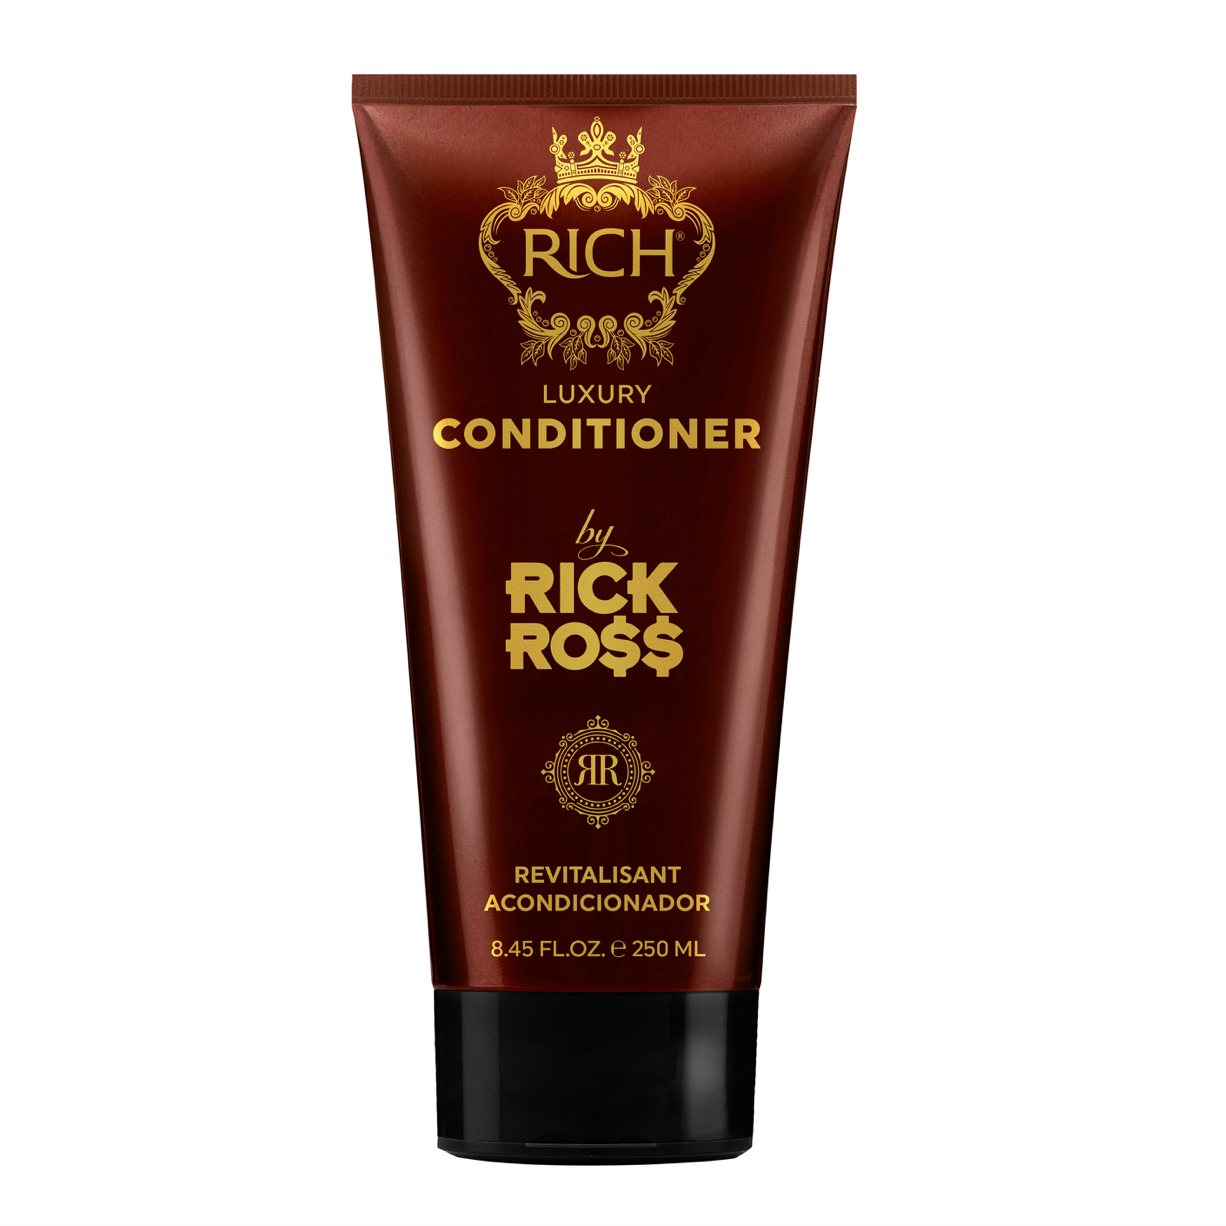 RICH by Rick Ross Luxury Conditioner 250 ml